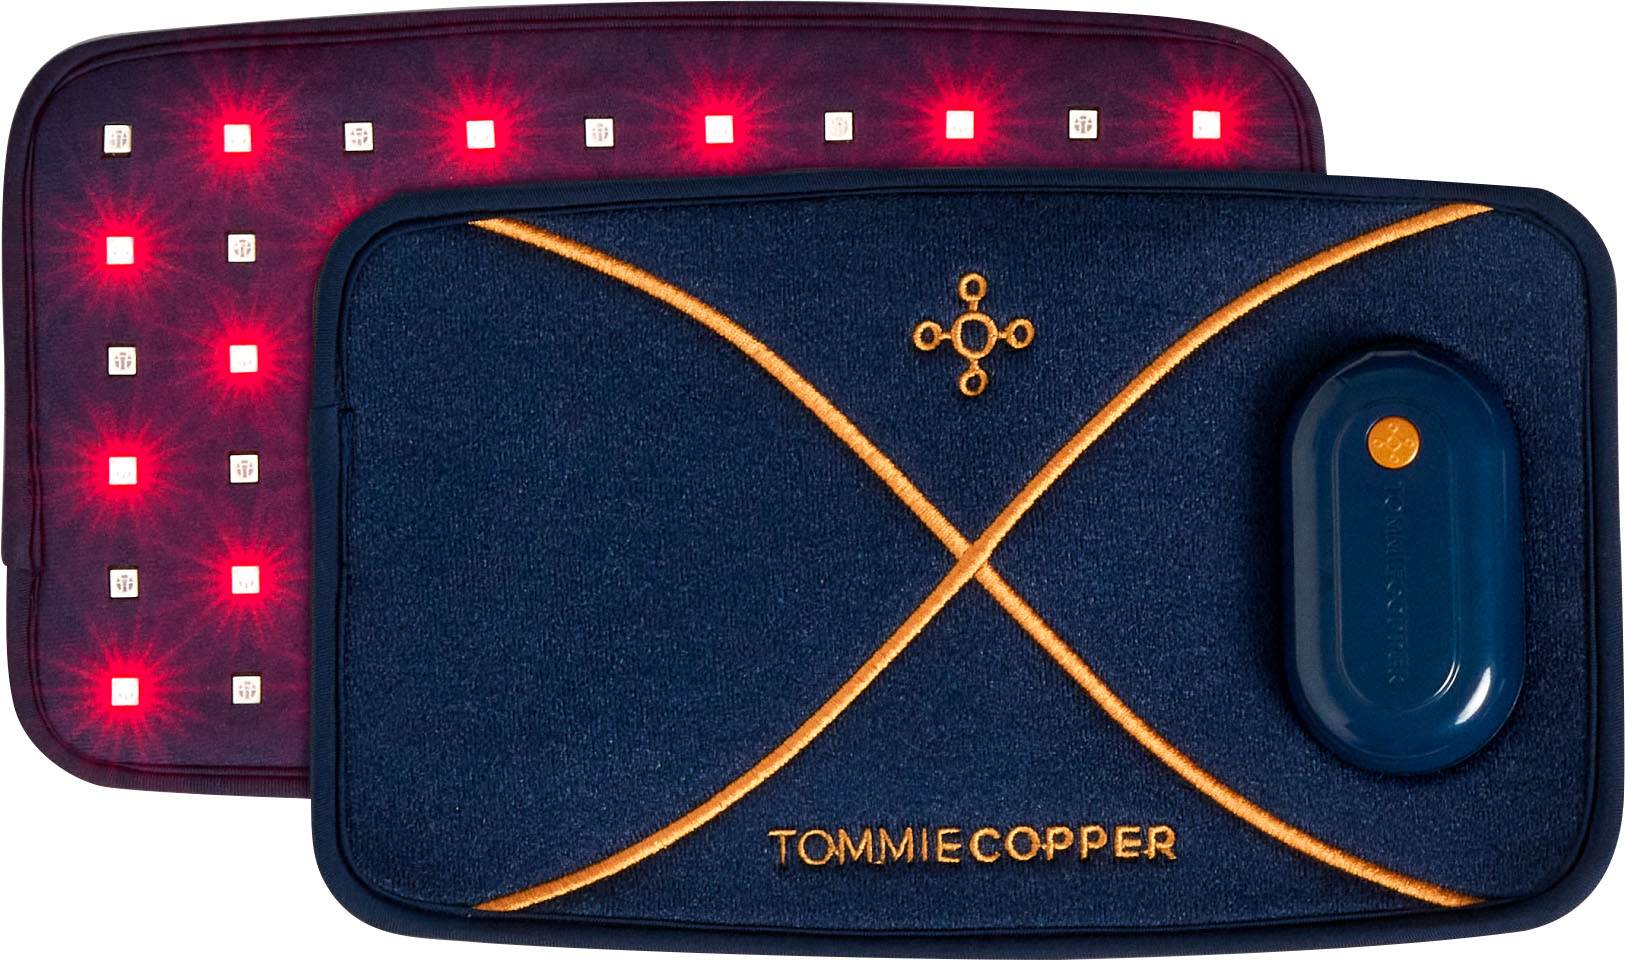 Tommie Copper Review: Is This Brand Worth Buying?